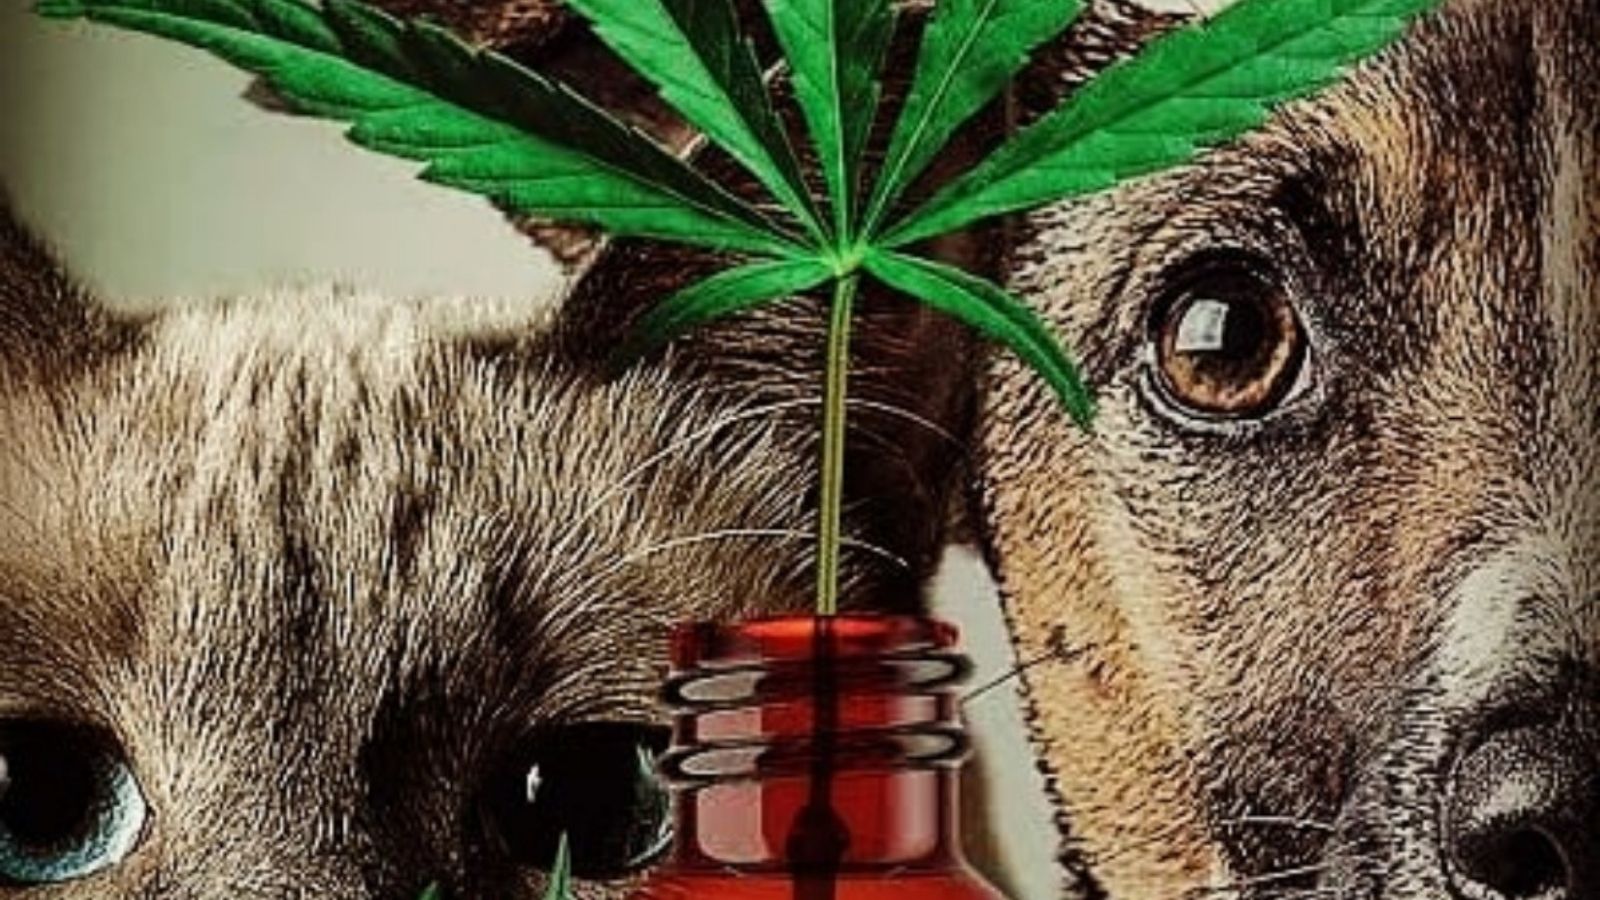 A cat and a dog photographed with a cannabis leaf and tincture bottle